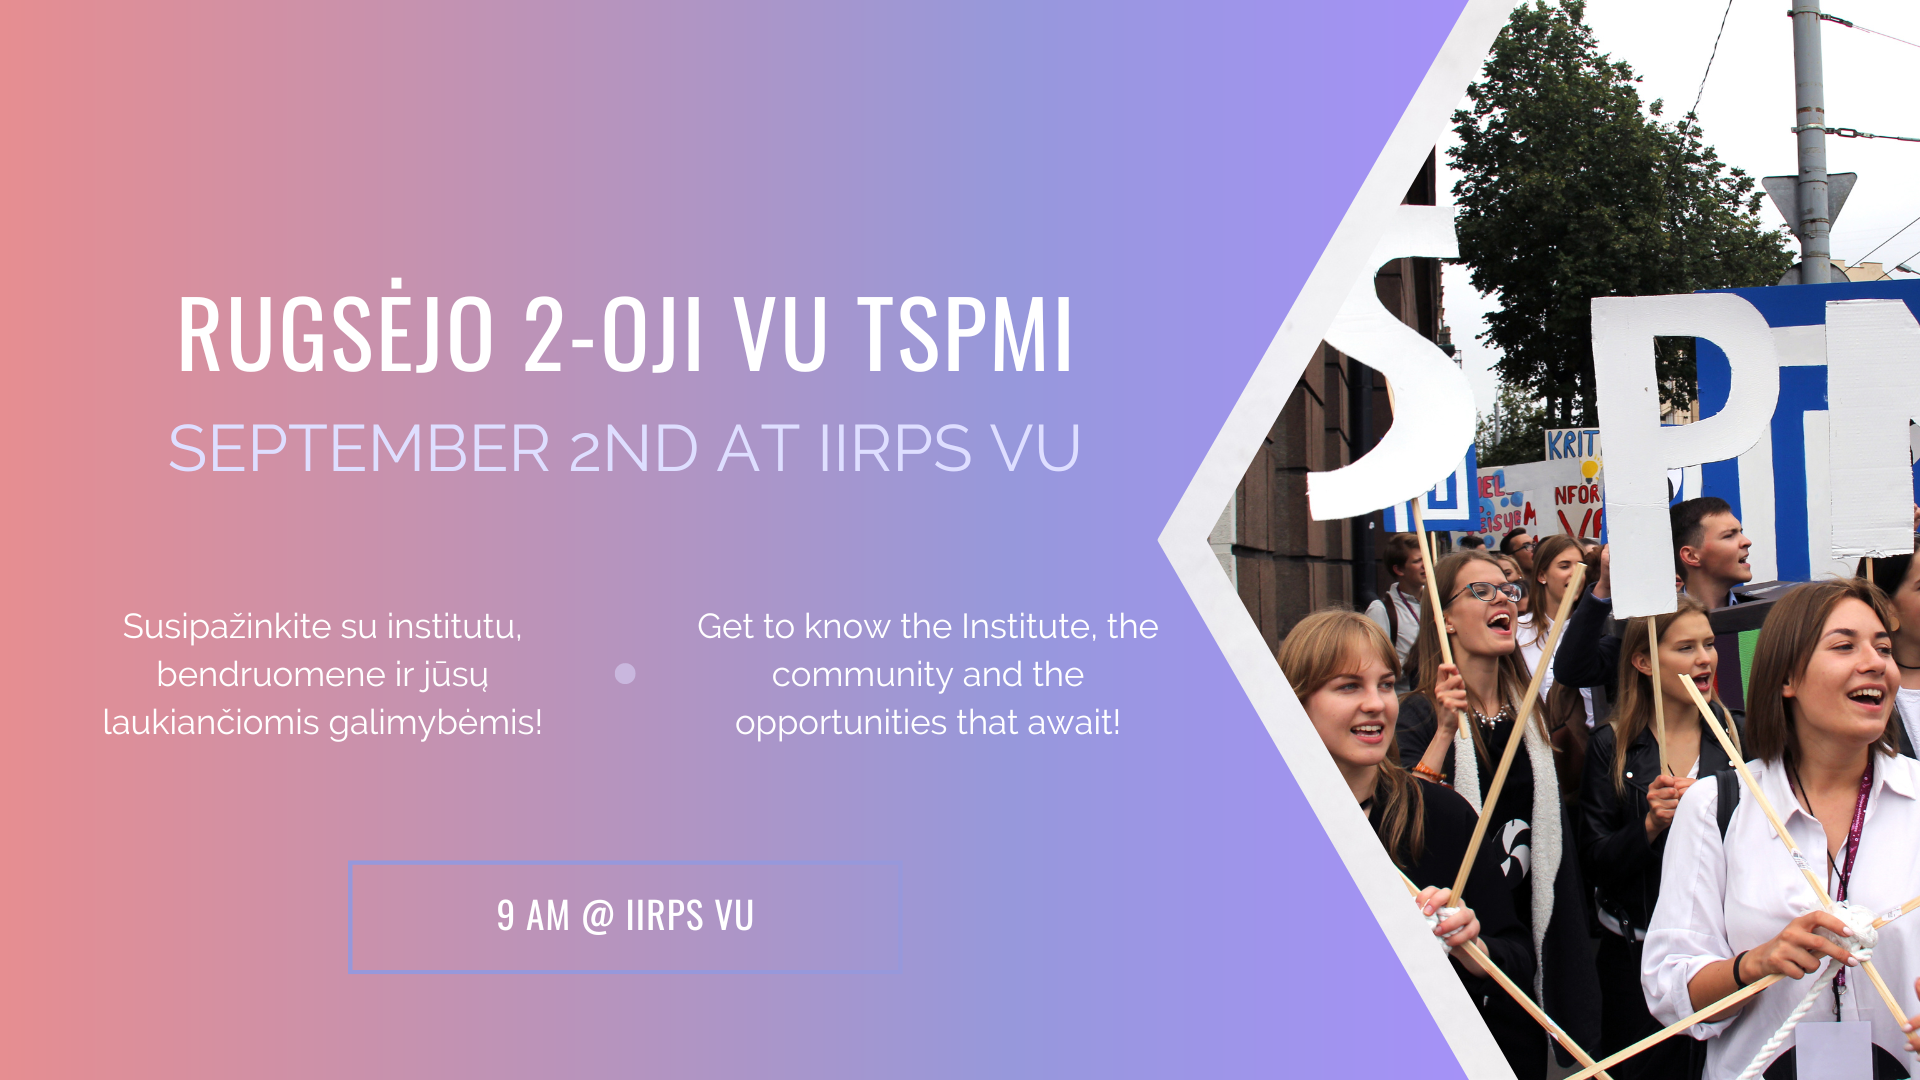 Get to know IIRPS VU!